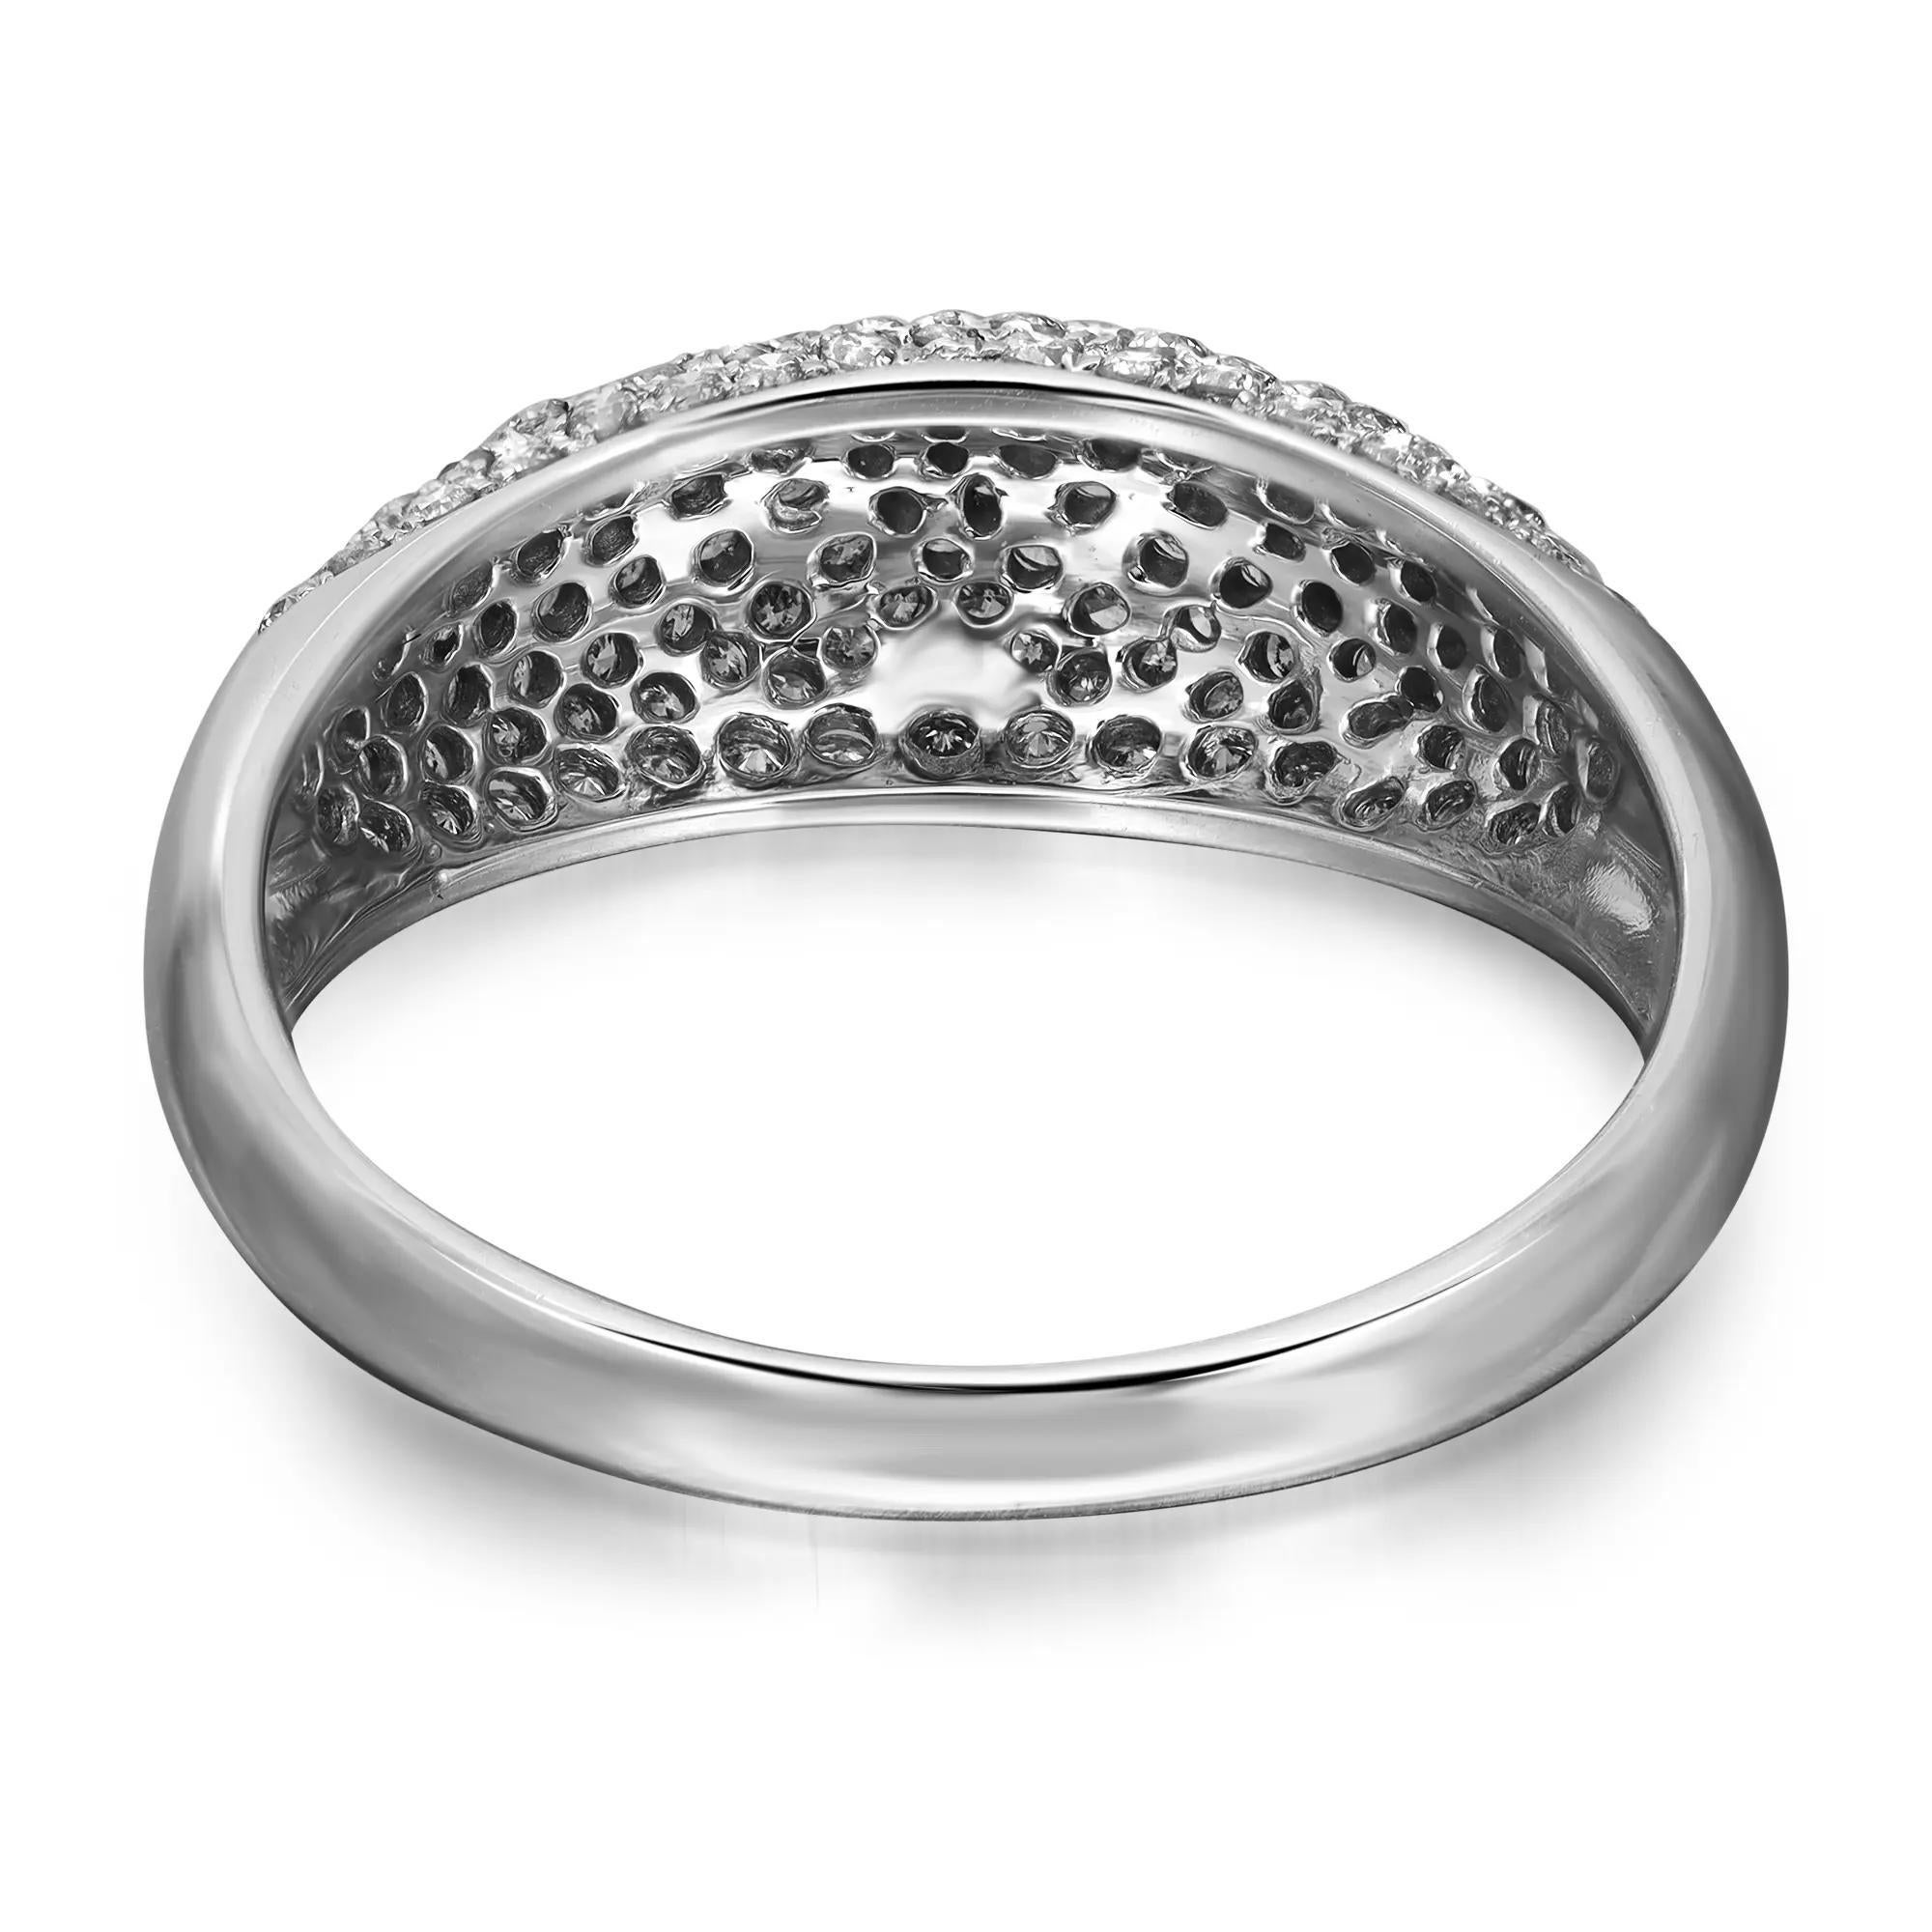 Round Cut 0.77Cttw Pave Set Round Diamond Ladies Band Ring 14K White Gold Size 8 For Sale